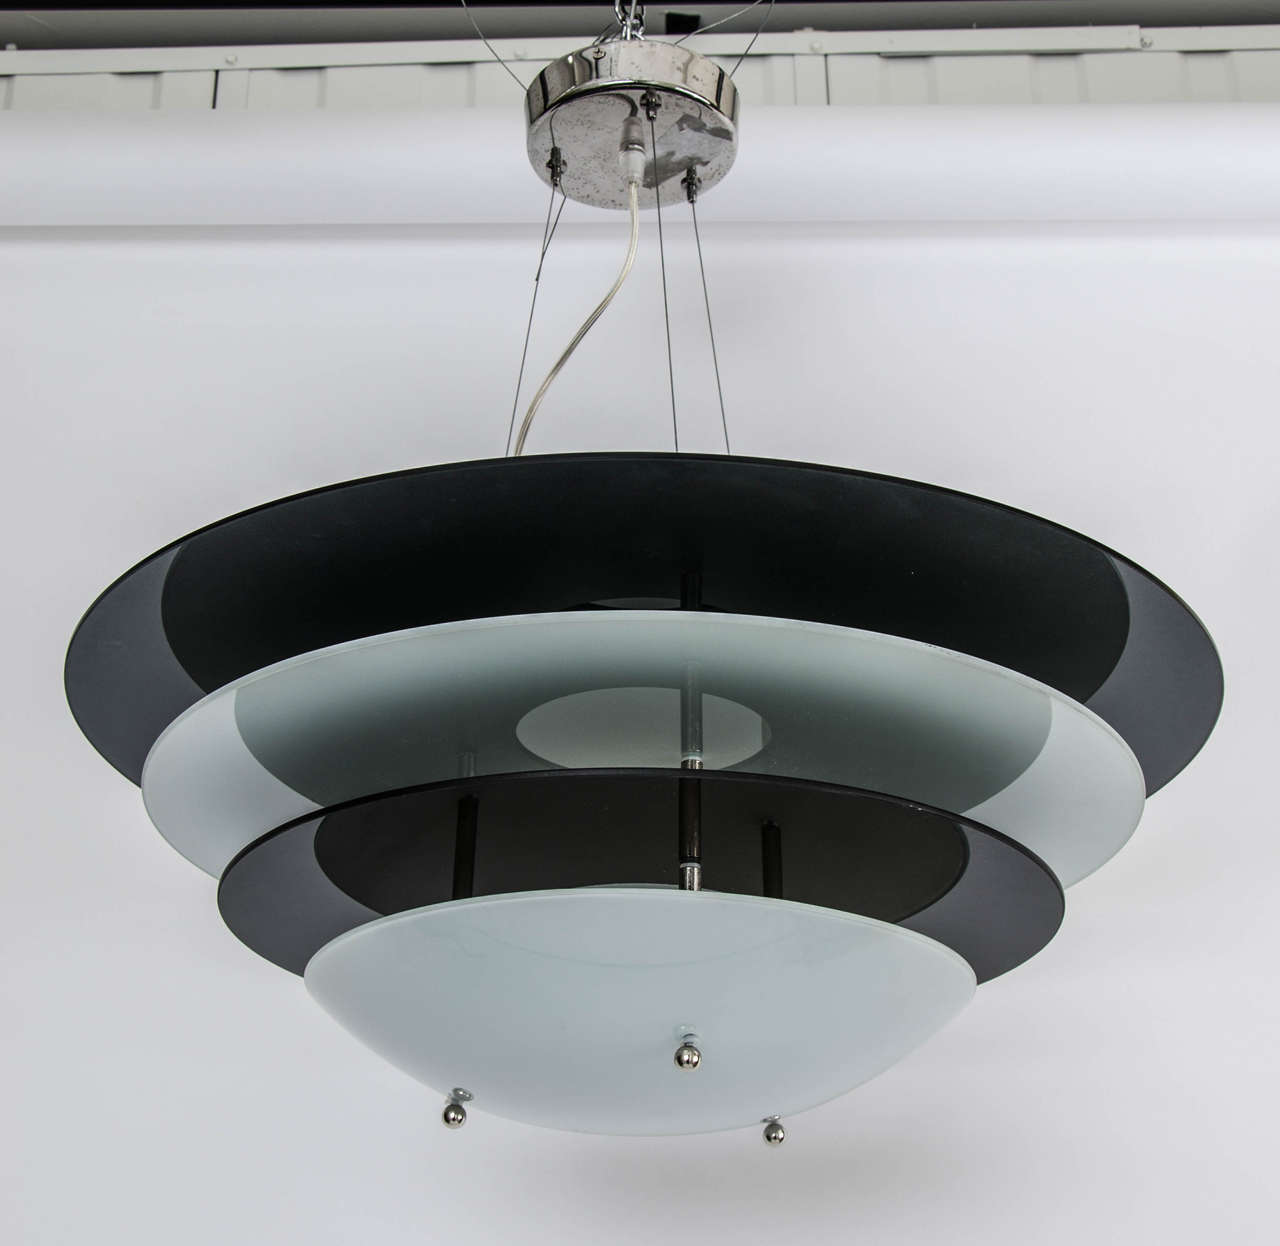 Ceiling light with black and white glass dishes, designed by Gino Sarfatti for Arteluce, prod., Italy, circa 1980.
Dimensions: Max diameter 56 cm - 22.05 in.
Min diameter 31 cm - 12.20 in.
Full height adjustable.
Height of the light 30 cm -